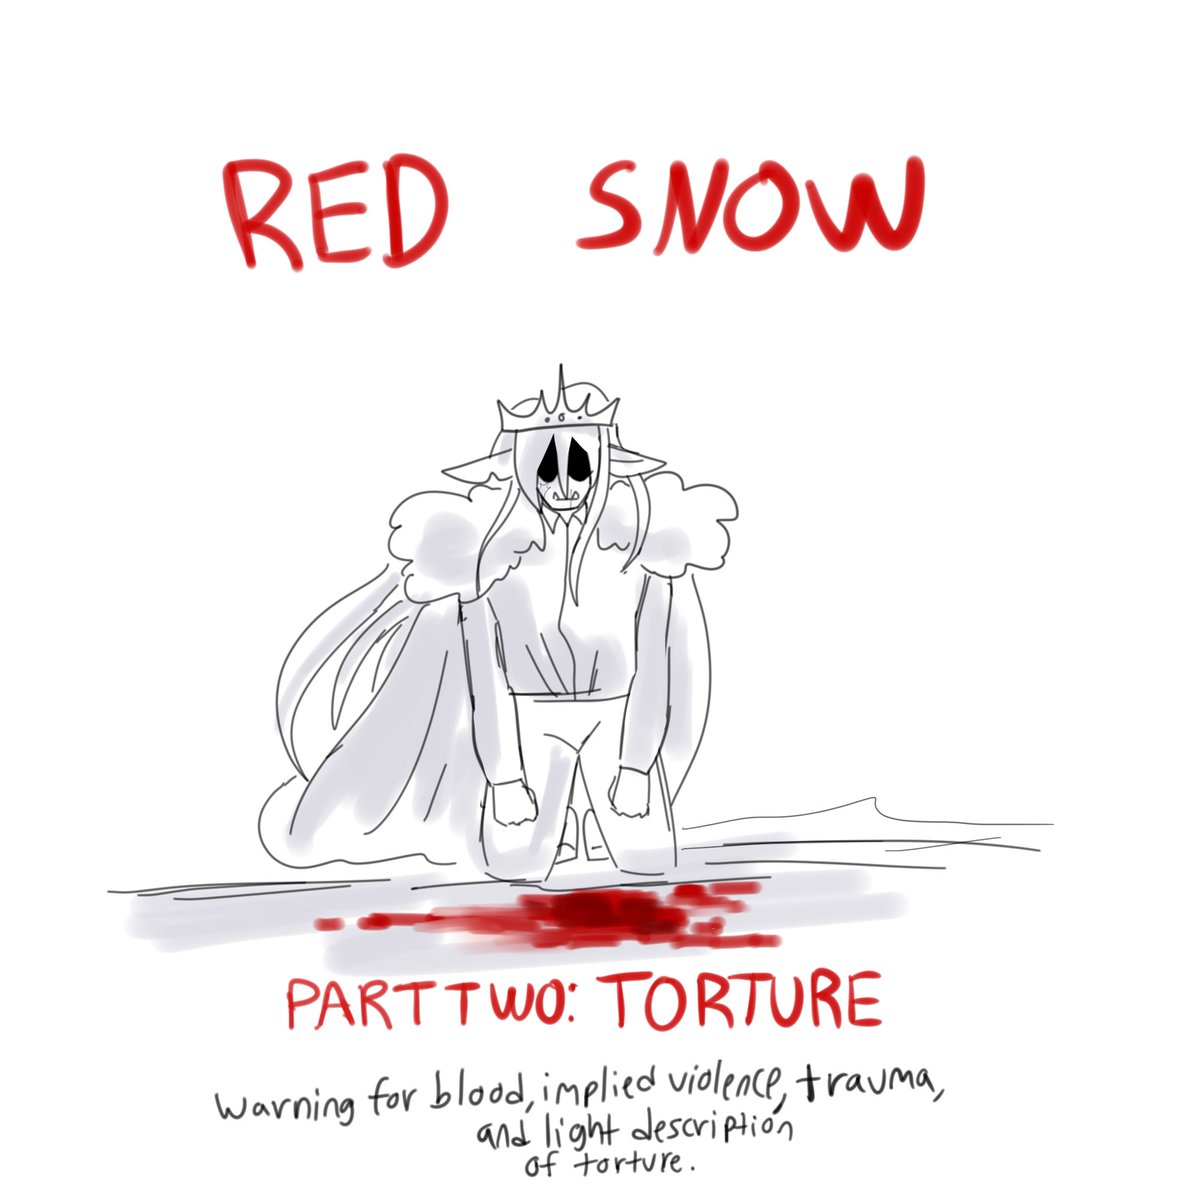 tw// blood, implied violence, trauma, body horror, and very light description and portrayal of torture

red snow, part two: torture
(1/2)
.
.
.
#technobladefanart #technoblade #tommyinnit #philza #ranboo #tubbofanart #ranboofanart #dreamsmpfanart #dreamsmp 